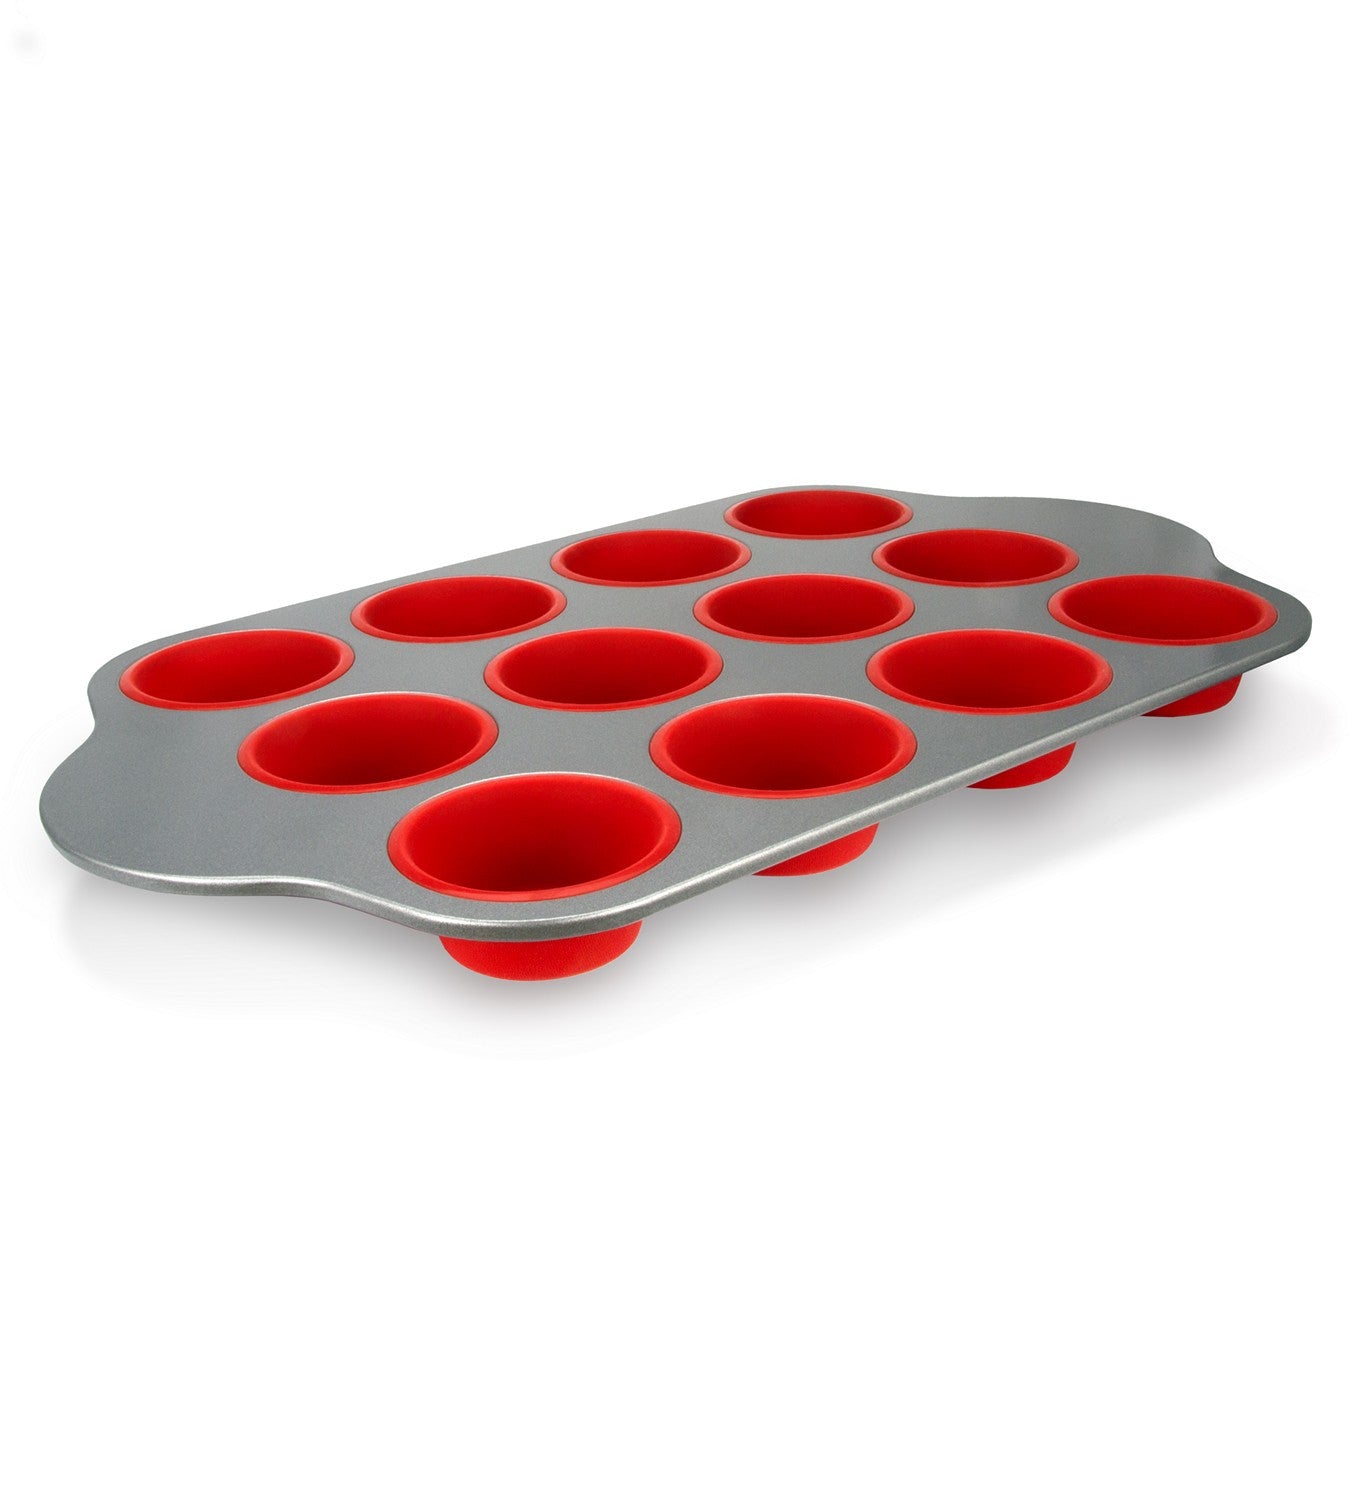 Silicone Muffin Pan with Steel Frame, 12 Cups Full Size , Professional Non-Stick Baking Molds by Boxiki Kitchen , FDA Approved BPA-Free Bakeware